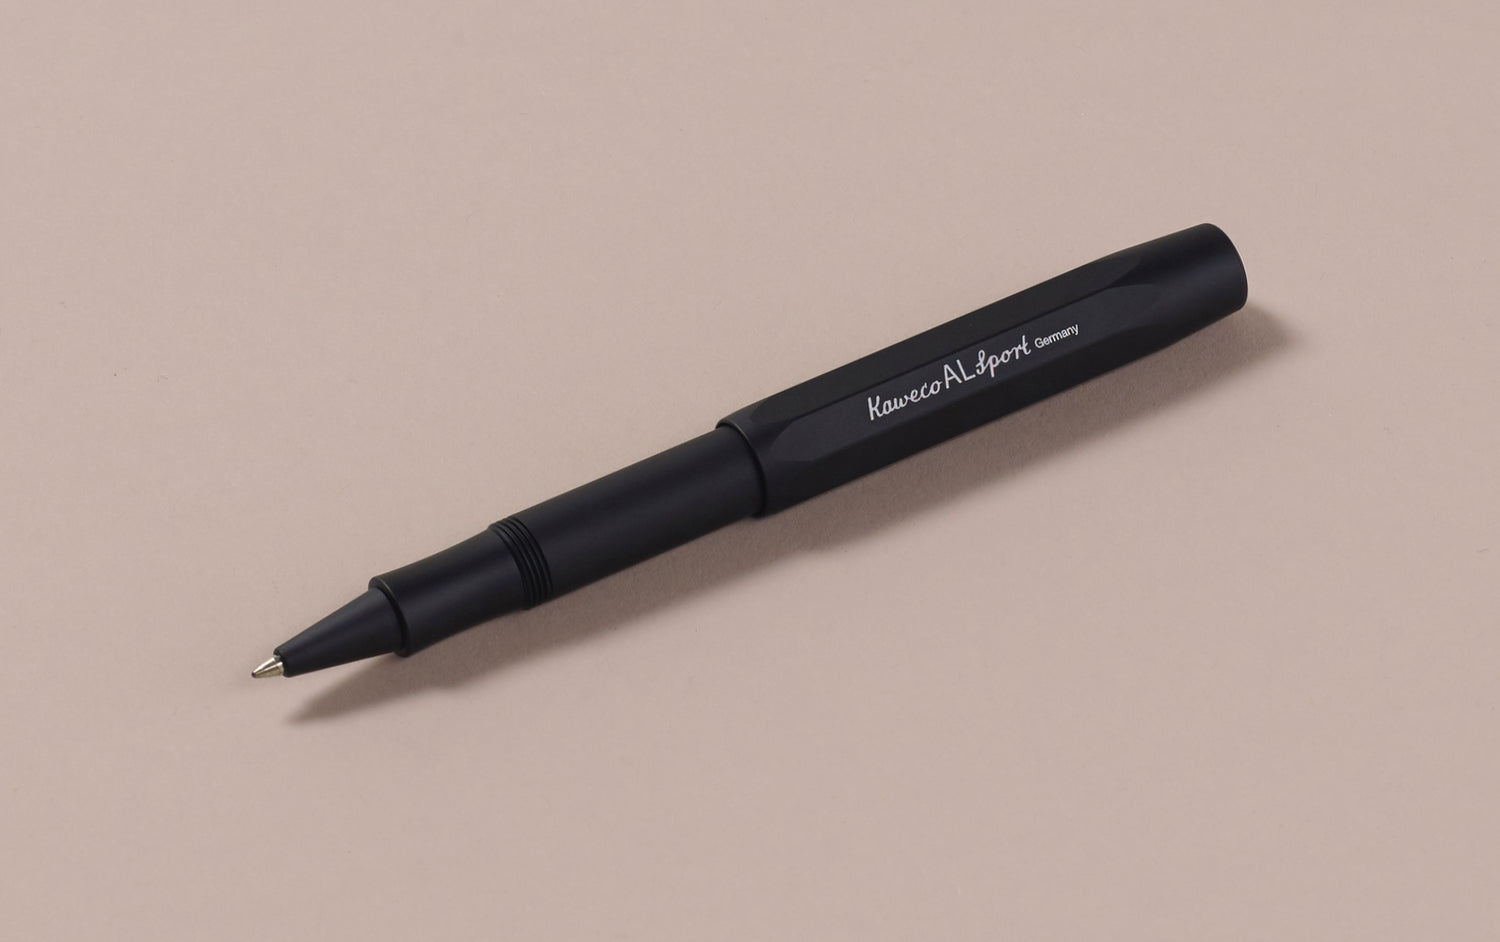 Kaweco AL Sport Rollerball Pen - Black – Duly Noted Stationery